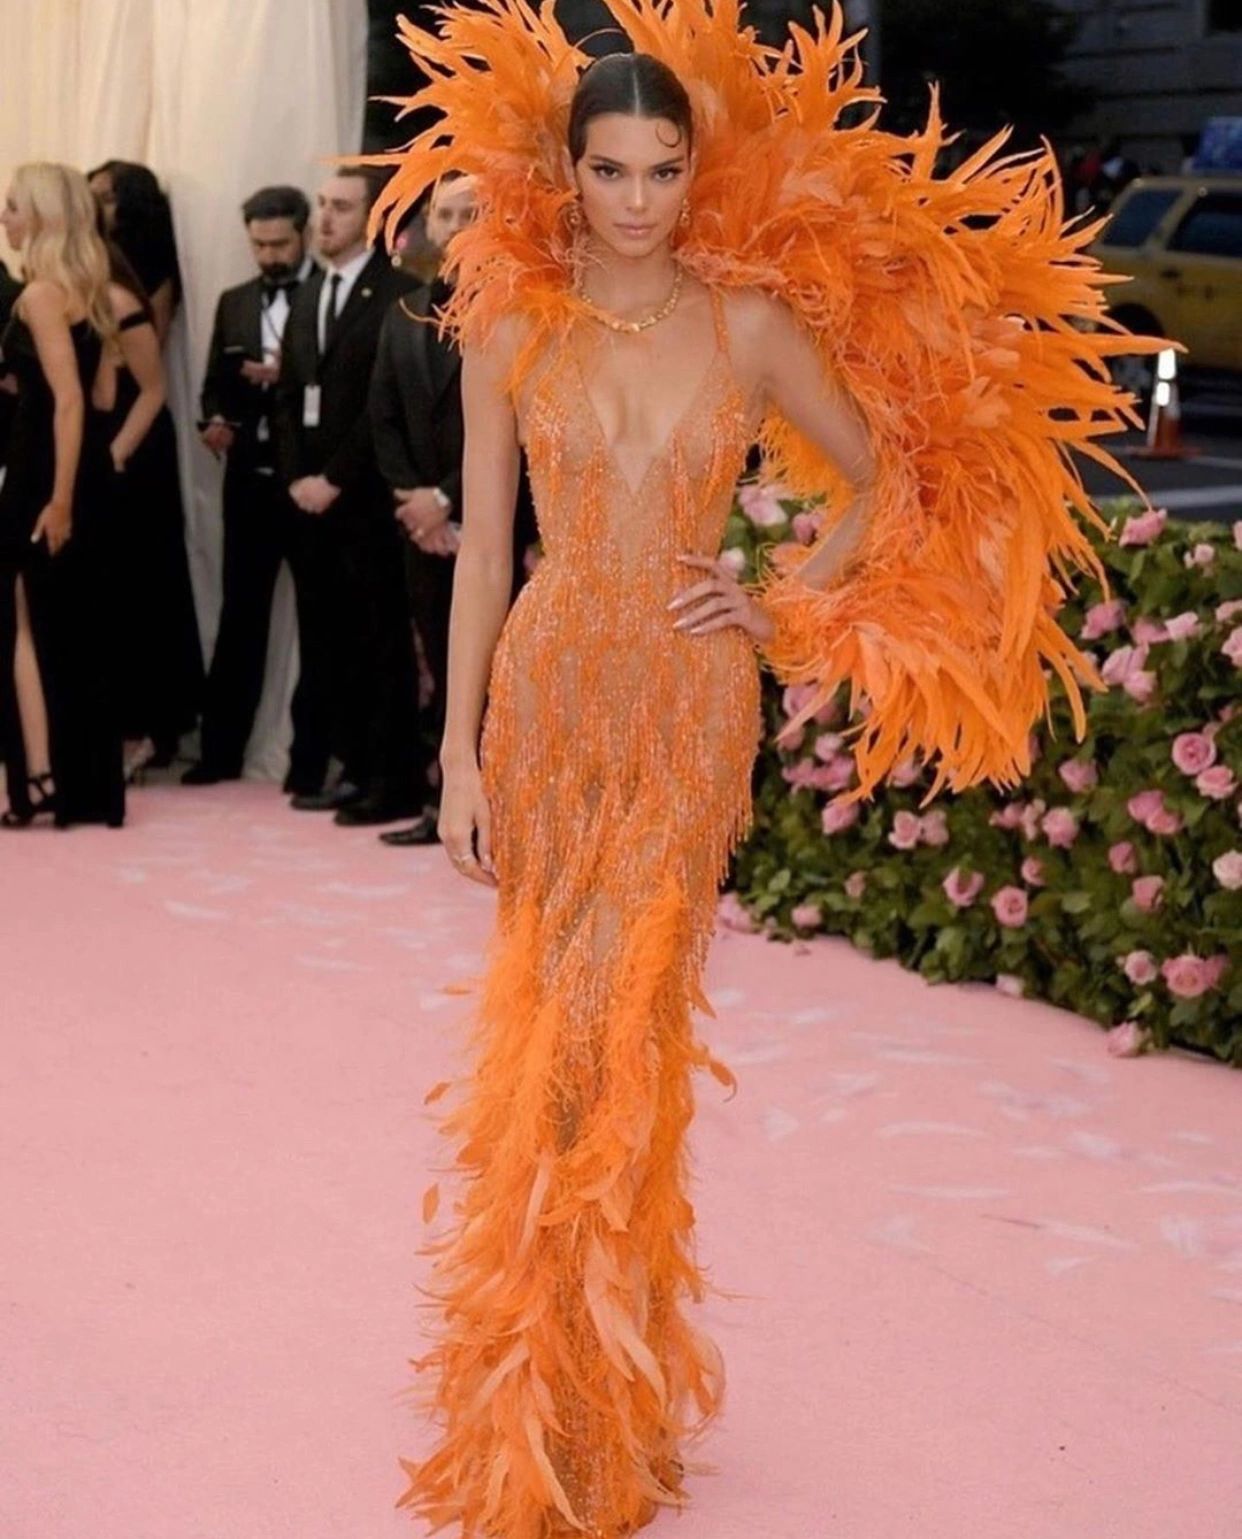 Met Gala, 2019: Kendall Jenner. (Getty Images)